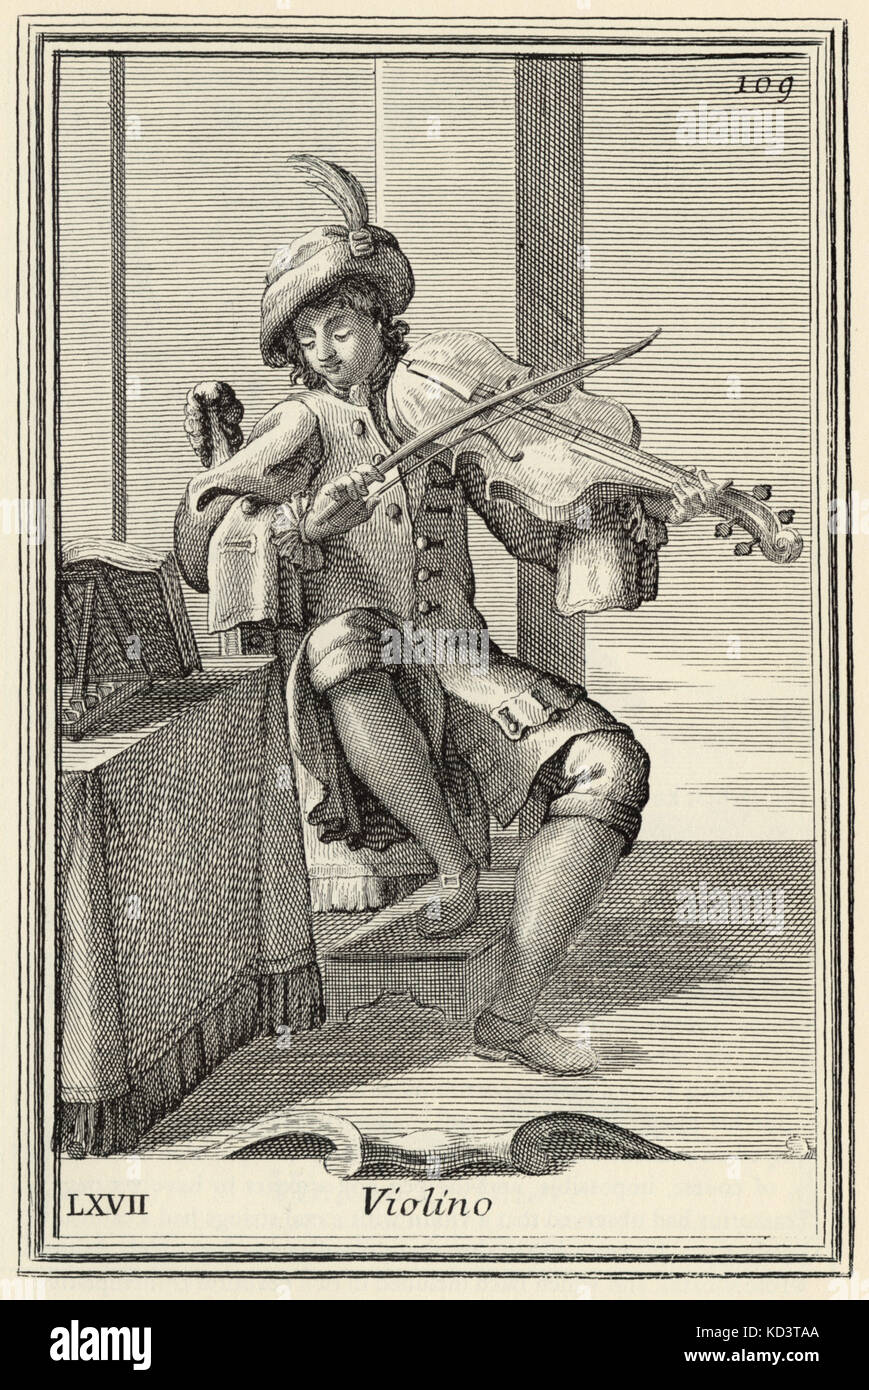 Violino-(Renaissance) violin being played by musician This instrument  first used in mid 16th century -note unfretted fingerboard. From Bonanni's 'Gabinetto Armonico' 1723 illustrated by Arnold van Westerhout. Illustration 67 Stock Photo